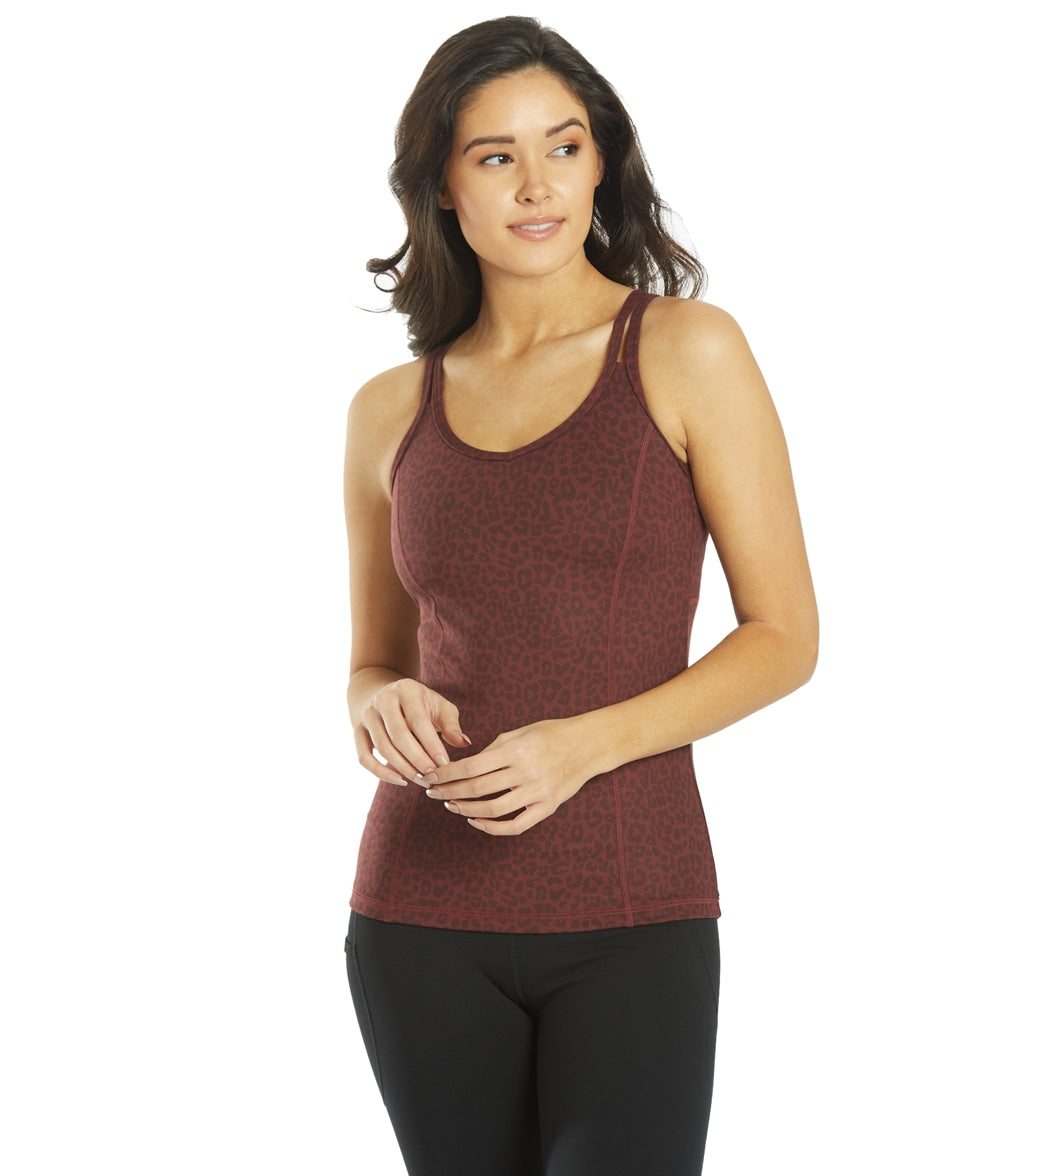 Everyday Yoga Radiant Cheetah Strappy Back Support Tank